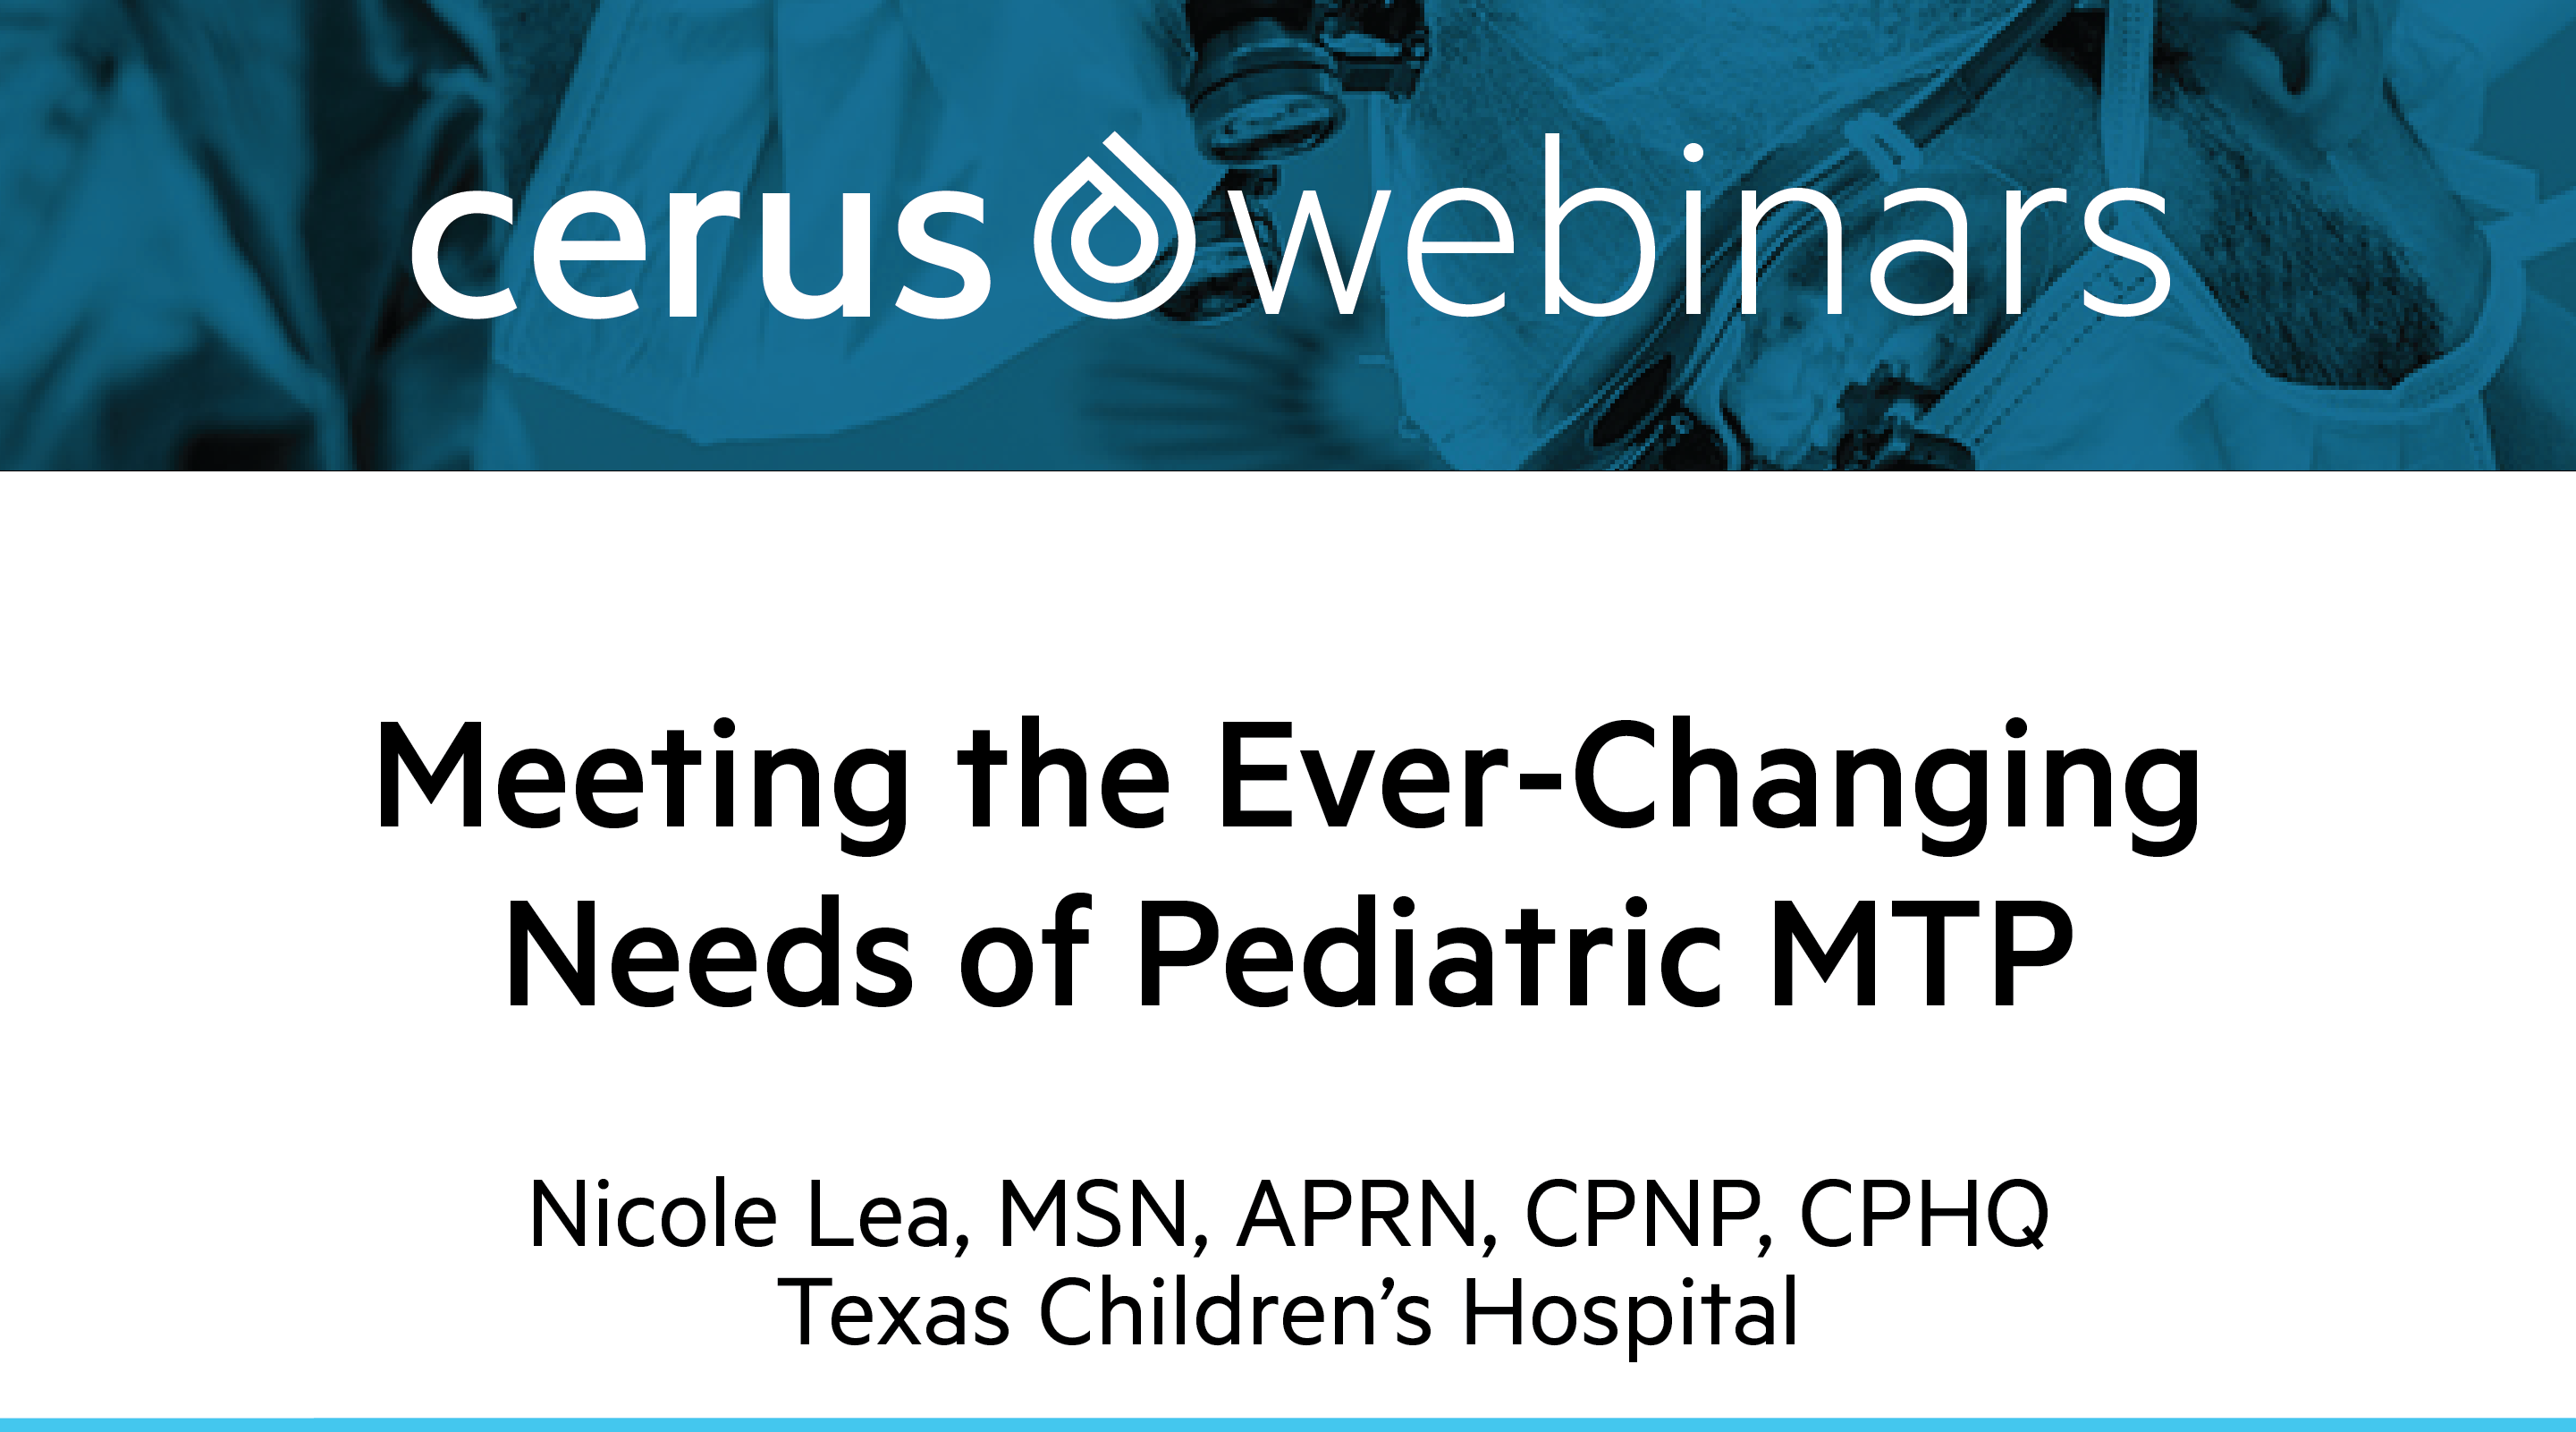 Meeting the Ever-Changing Needs of Pediatric MTP